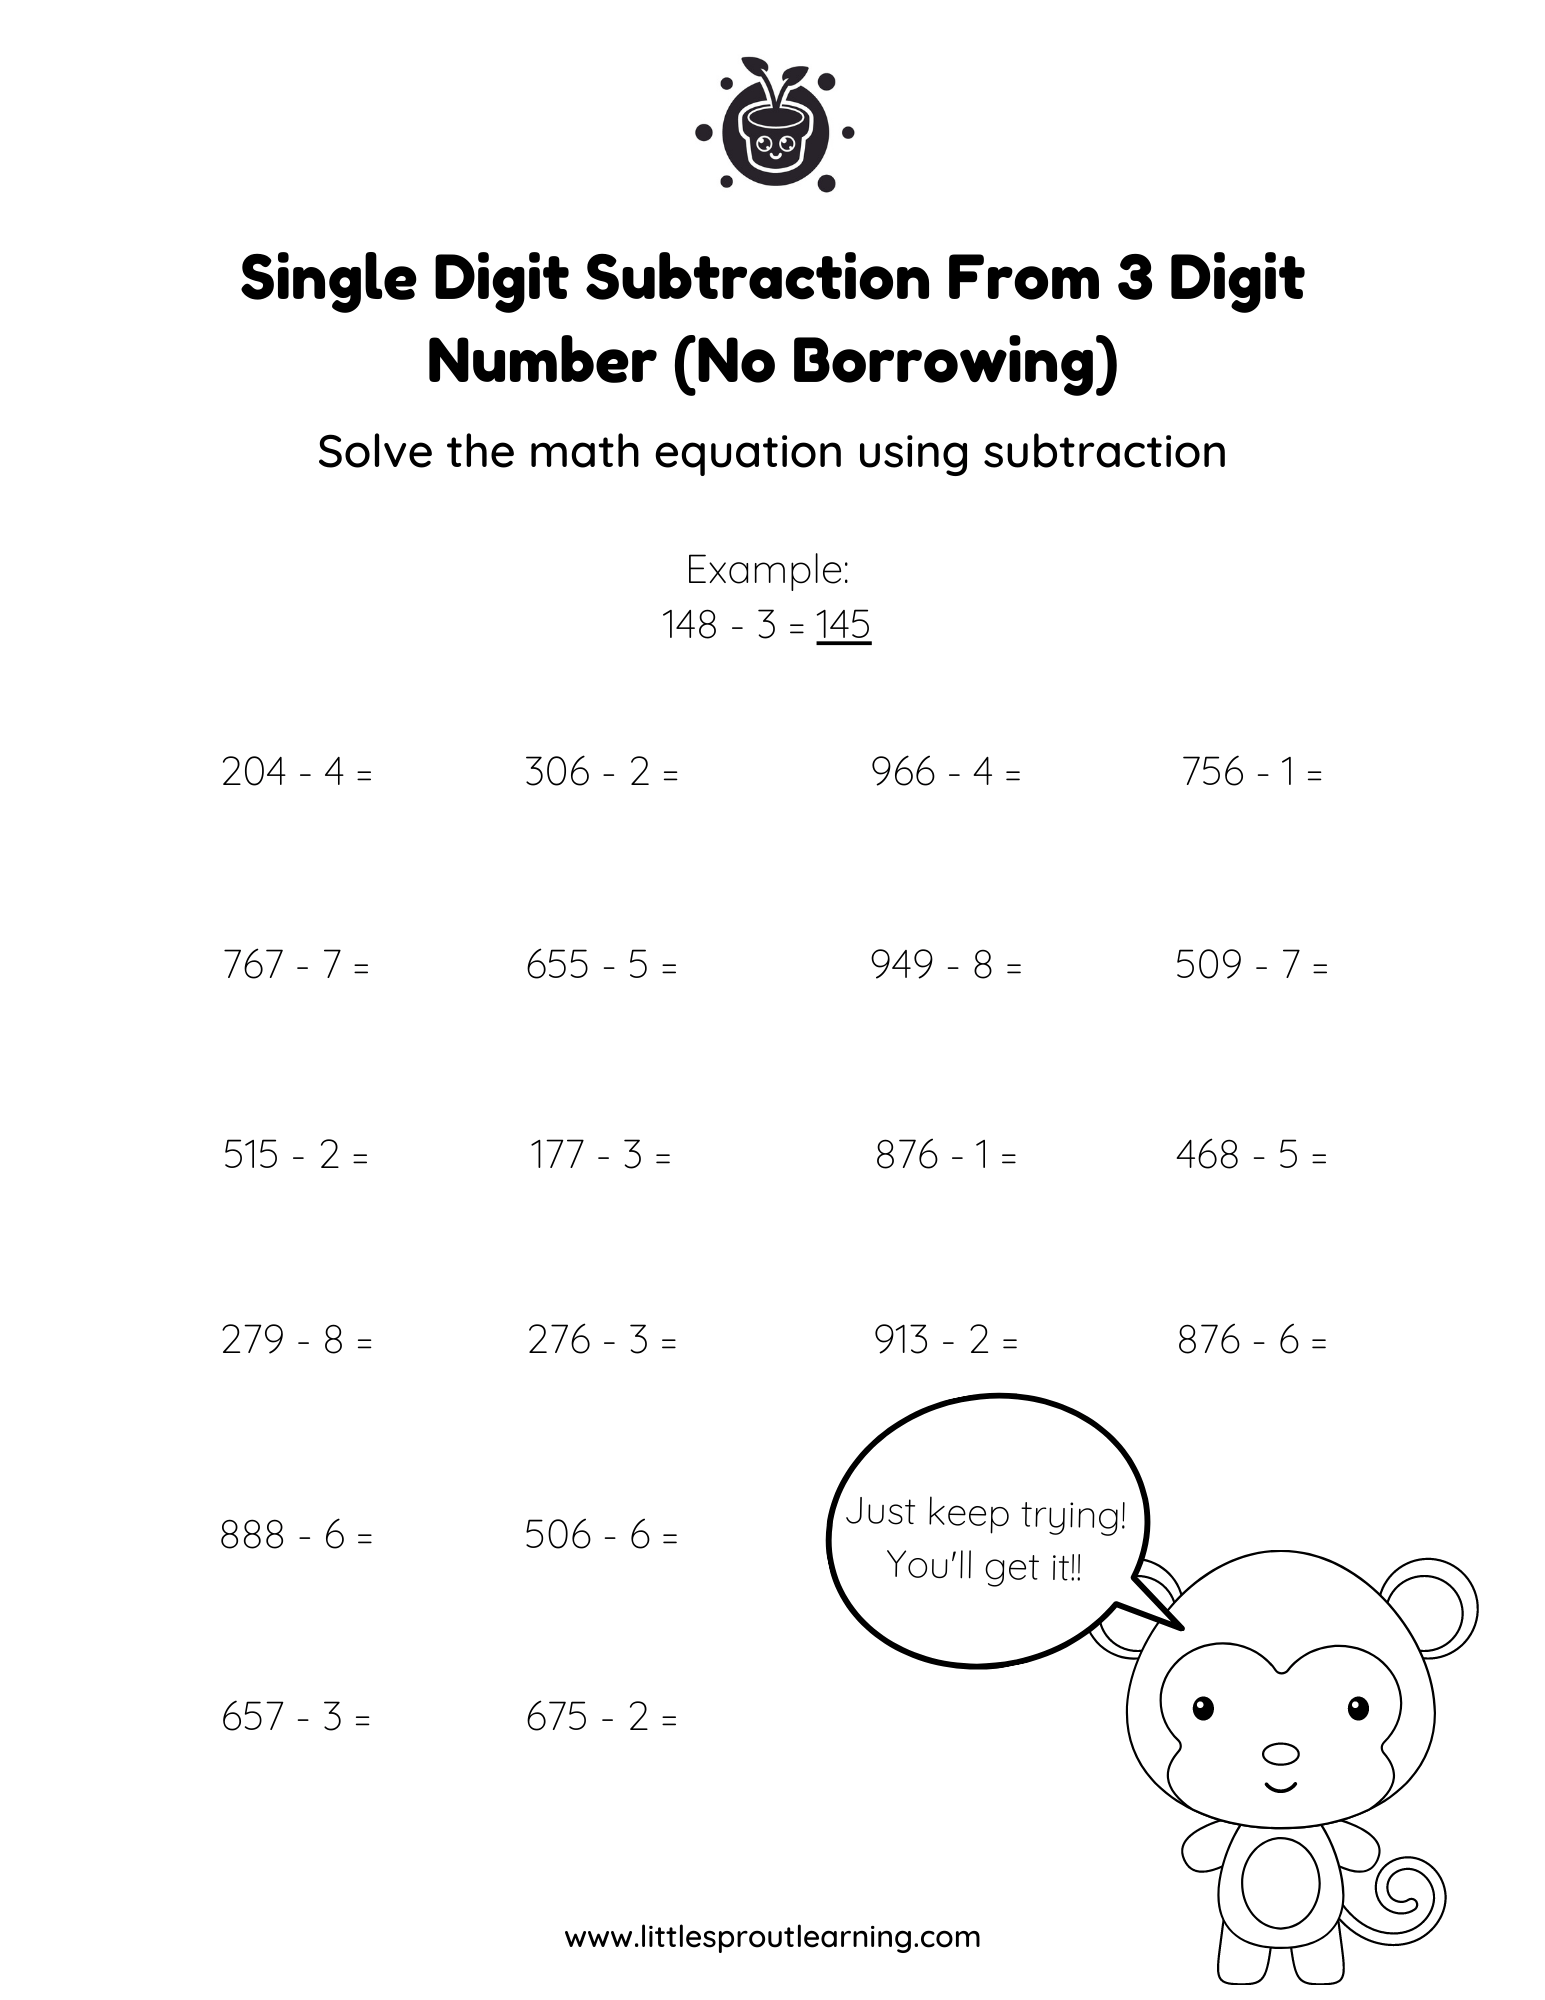 Single Digit Subtraction From 3 Digit